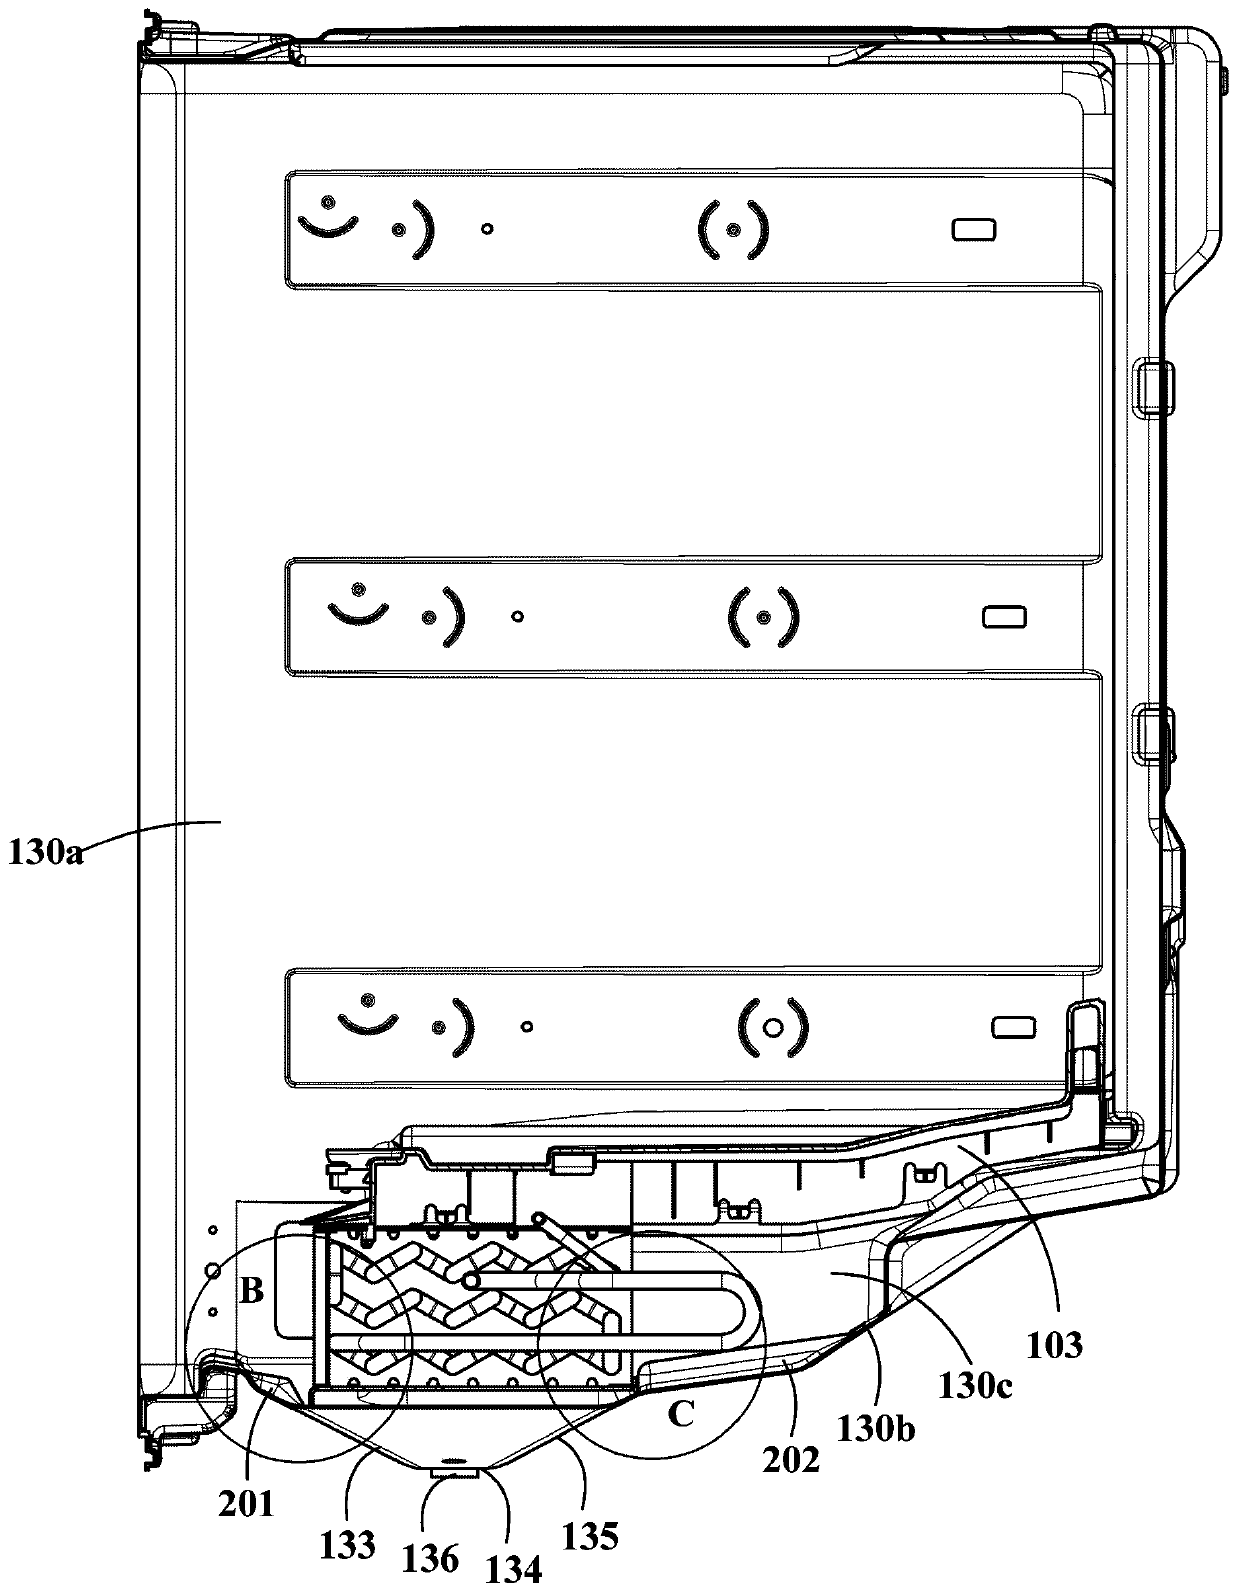 Refrigerator with improved evaporator mounting structure